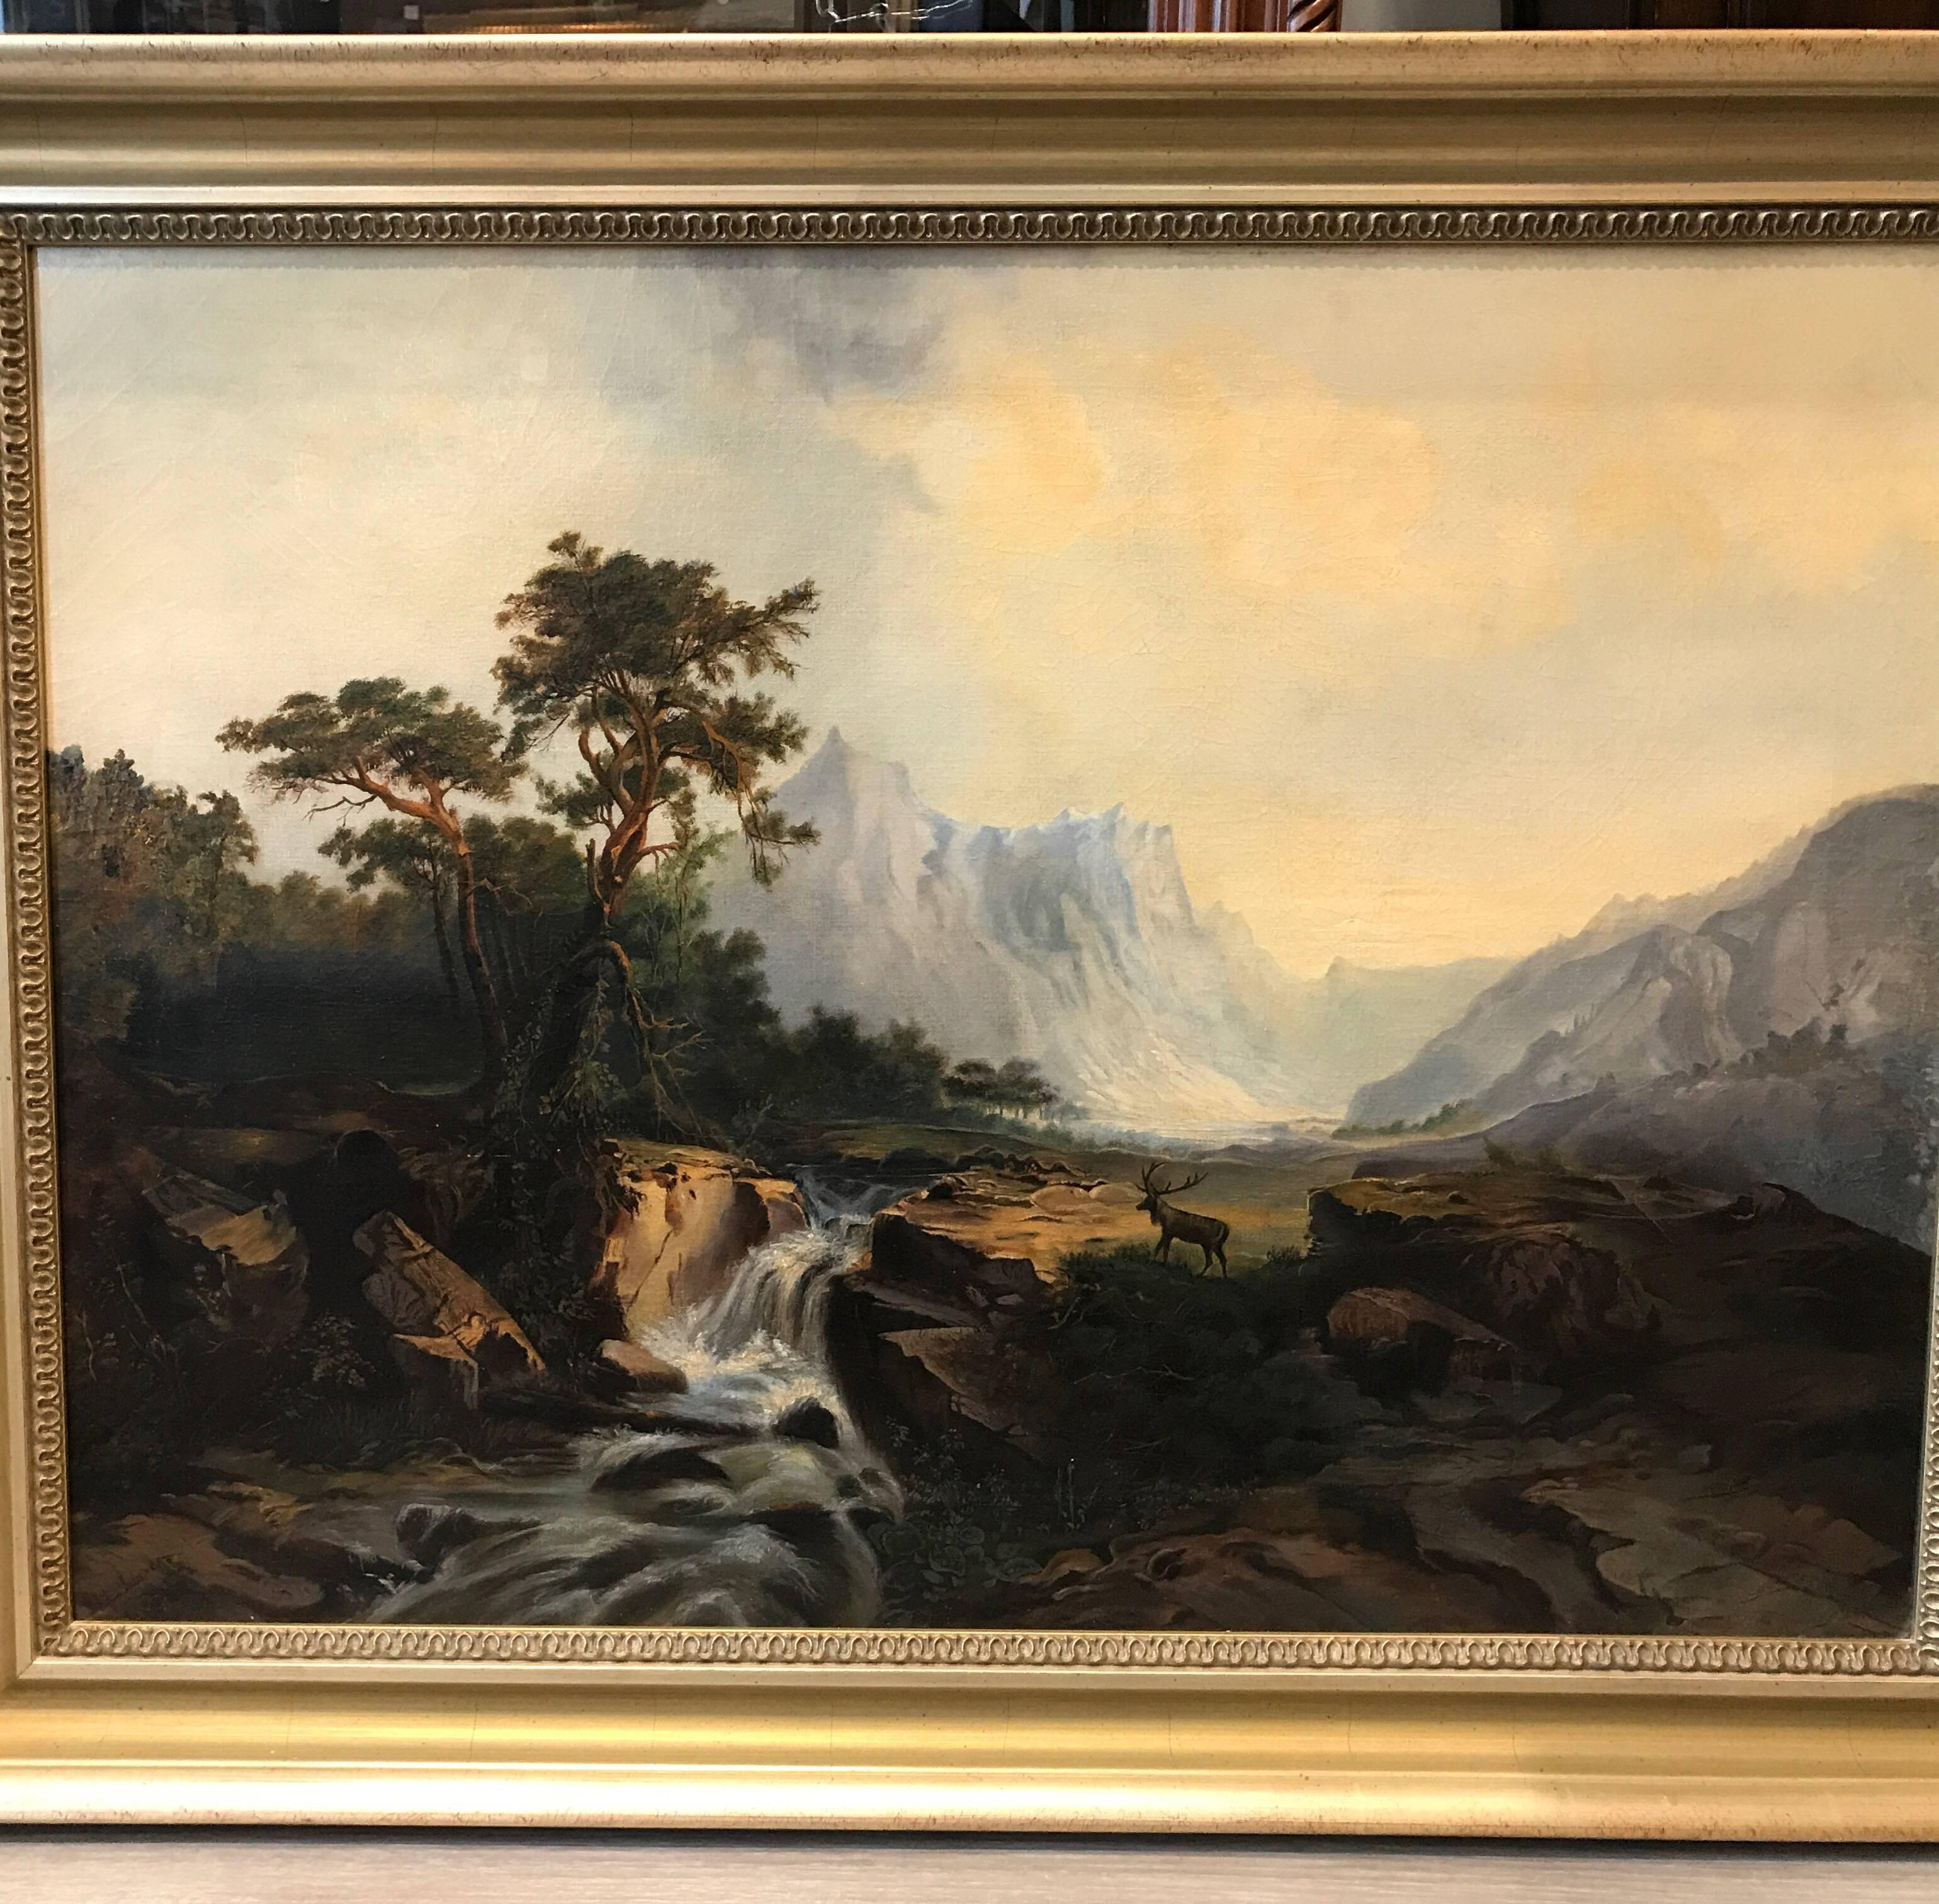 Antique 19th Century European Oil Painting on Canvas Signed M. L. Tunner, 1872 In Excellent Condition For Sale In Lambertville, NJ